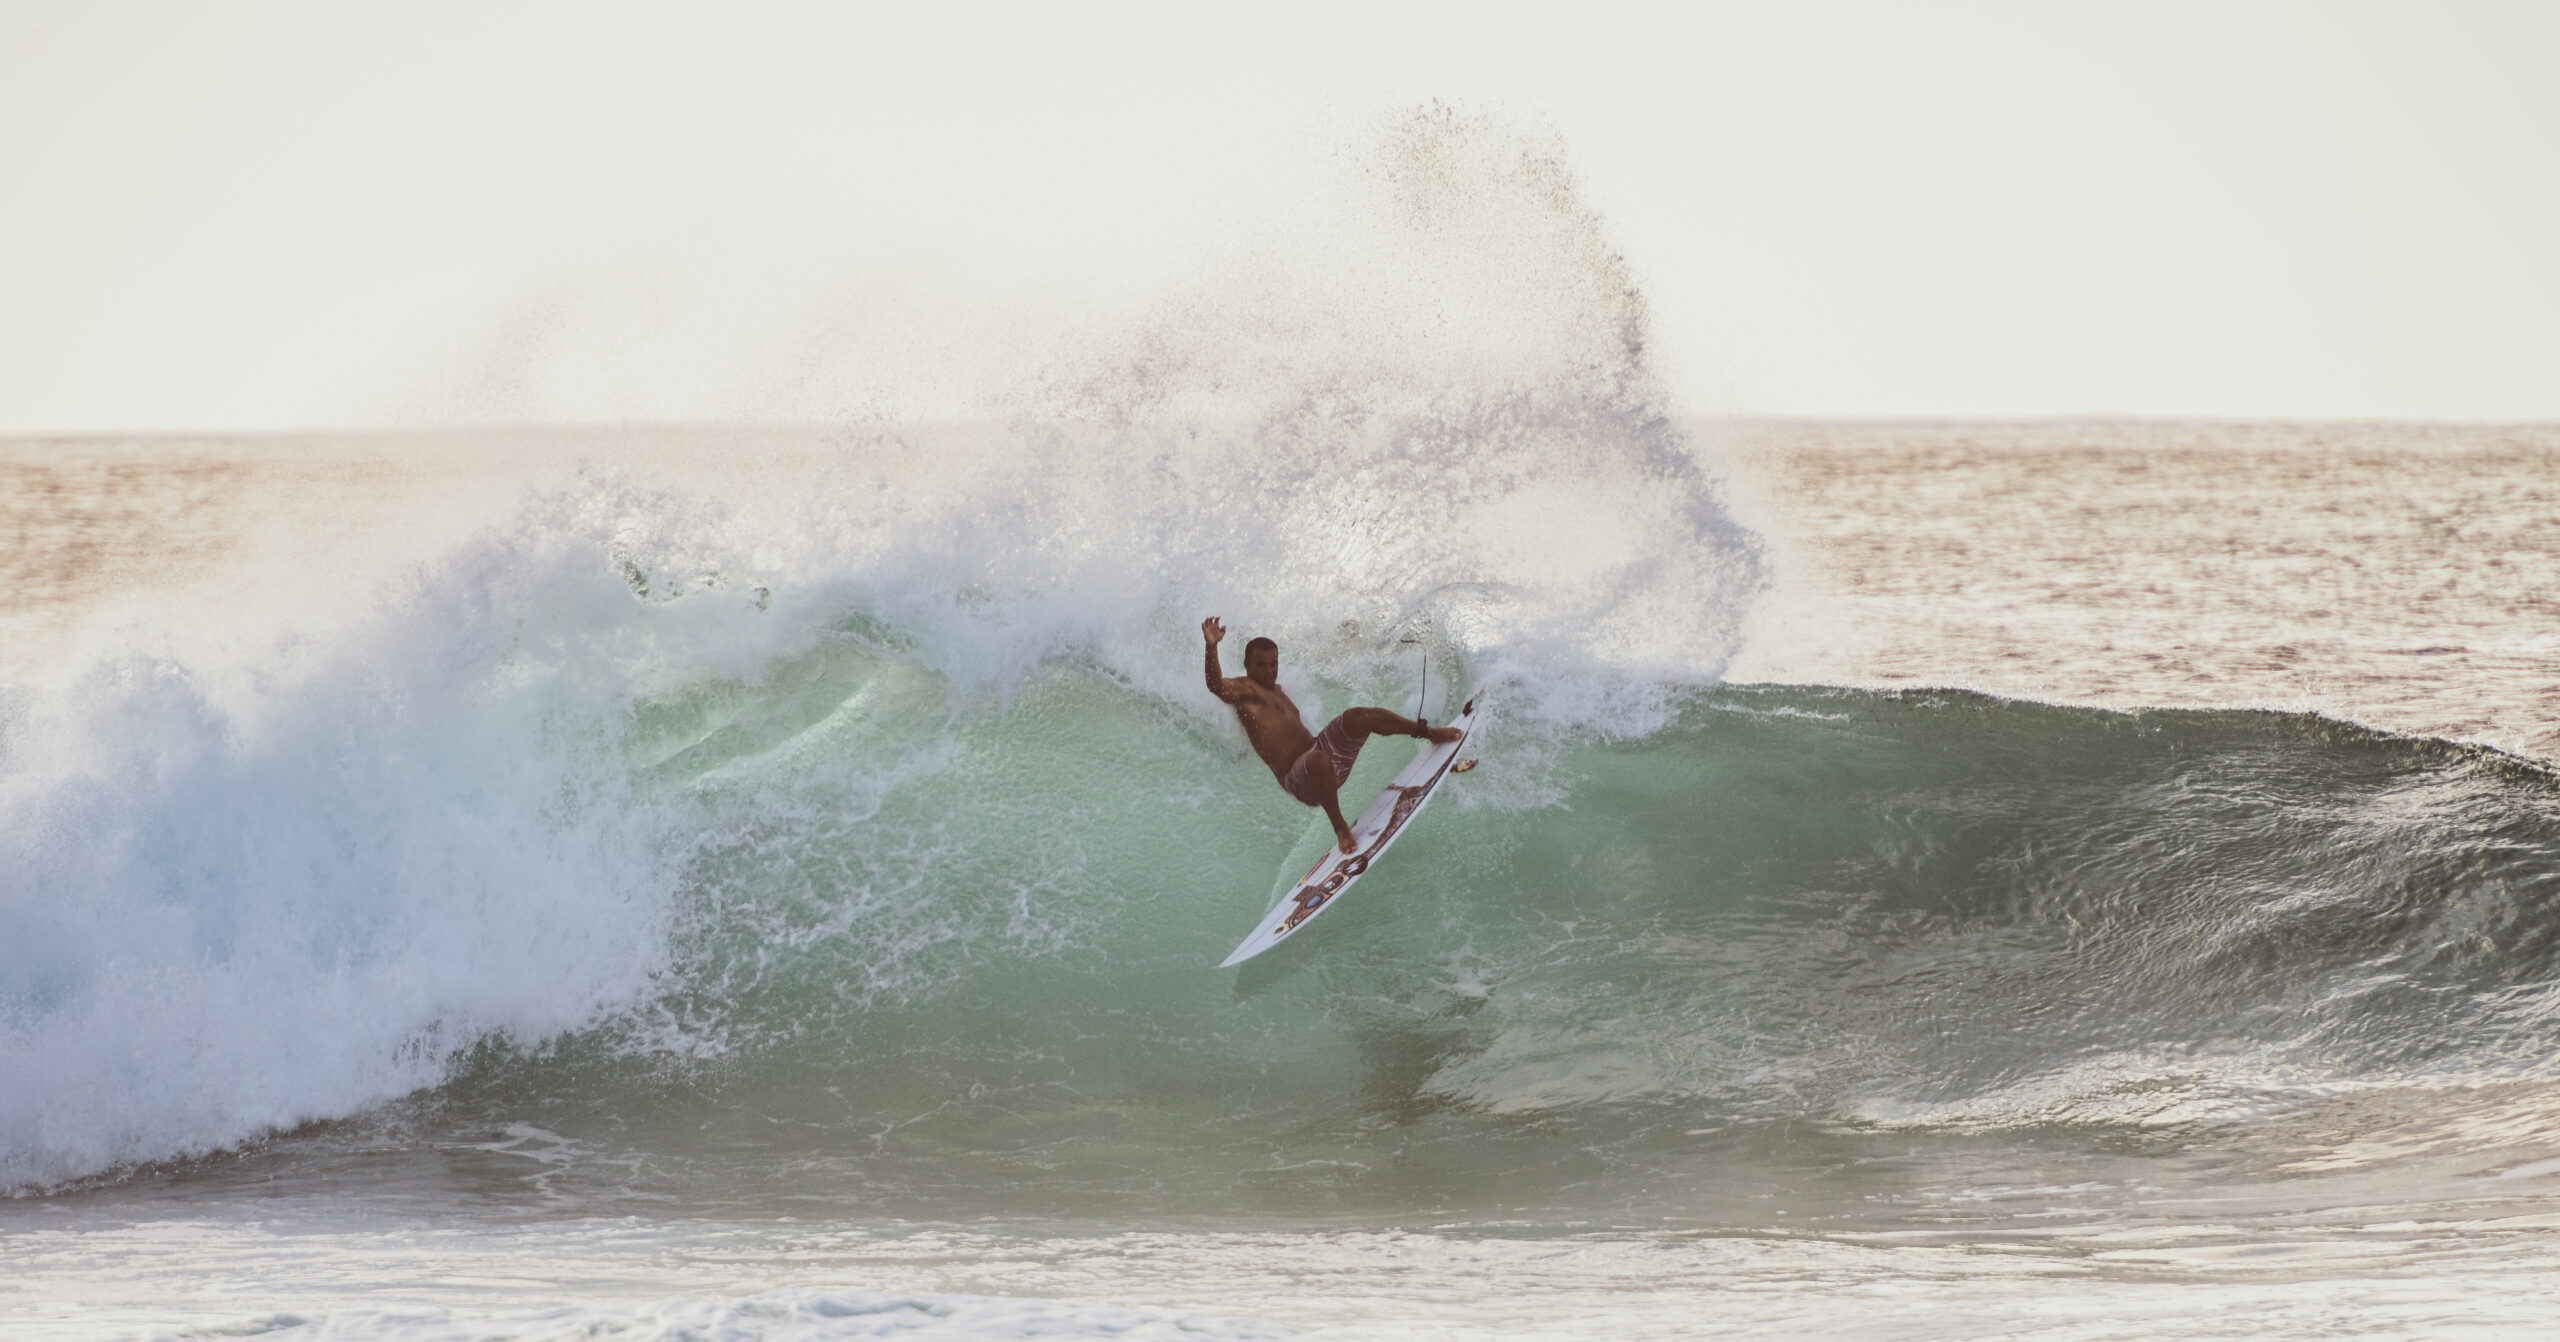 wiggolly dantas  performing a lay back cut back at the Bonzai Pipeline on the north shore of Oahu. Photo by Rob Wessels